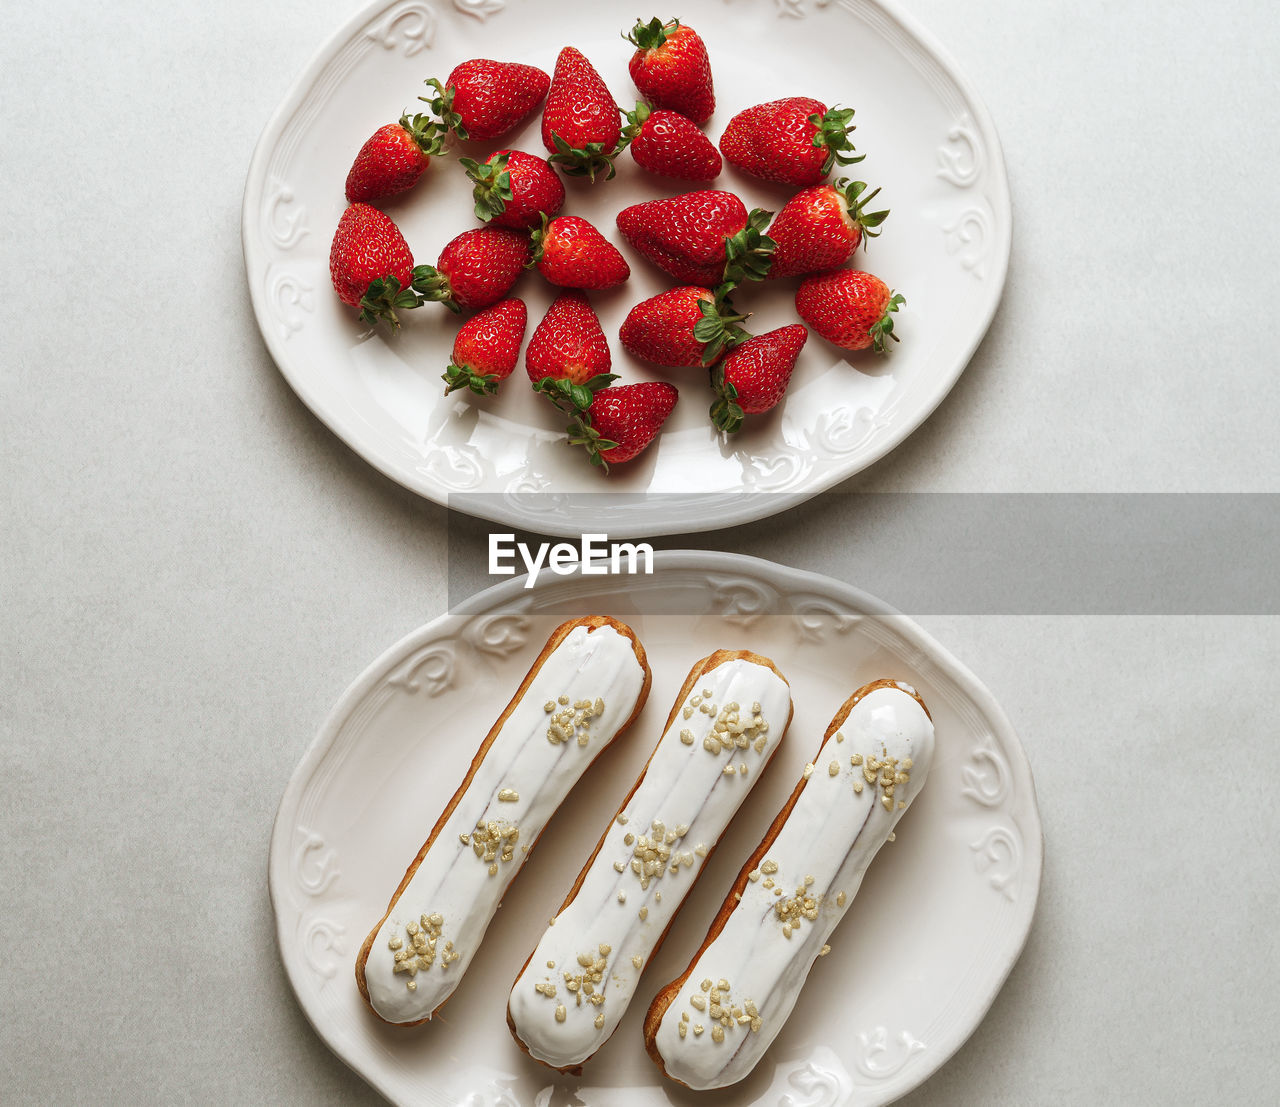 White glazed eclairs served with strawberries on two plates on white background, top view